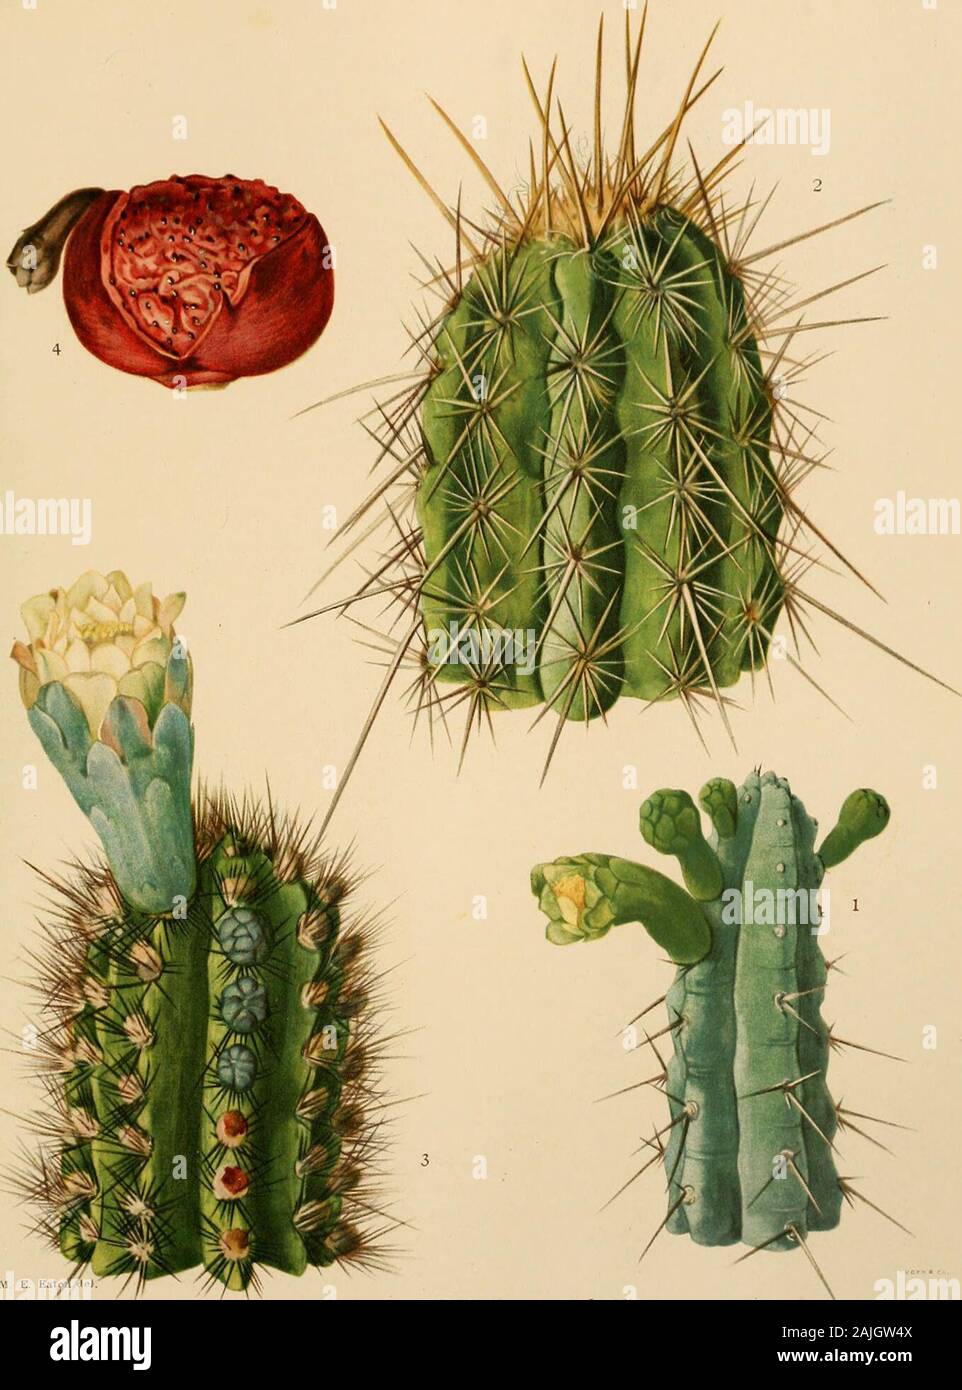 The Cactaceae : descriptions and illustrations of plants of the cactus family . Fig. 34.—Cephalocereus polylophus. BRITTON AND ROSE, VOL. II. 1. Flowering stem of Cephalocereus pentczdrophorus. 2. Top of stem of Cephalocereus gounellei. 3. Top of stem of Cephalocereus bahamensis, with flower. 4. Fruit of Cephalocereus deeringii. (All natural size.)  CEPHALOCEREUS. 33 9. Cephalocereus euphorbioides (Haworth). Cereus euphorbioides Haworth, Suppl. PI. Succ. 75. 1819. ia, ins euphorbioides Sprengel, Syst. 2: 496, 1825. Pilocereus euphorbioides Rumpler in F6rster, Handb. Cact. ed, 2.658. 1885. Pla Stock Photo